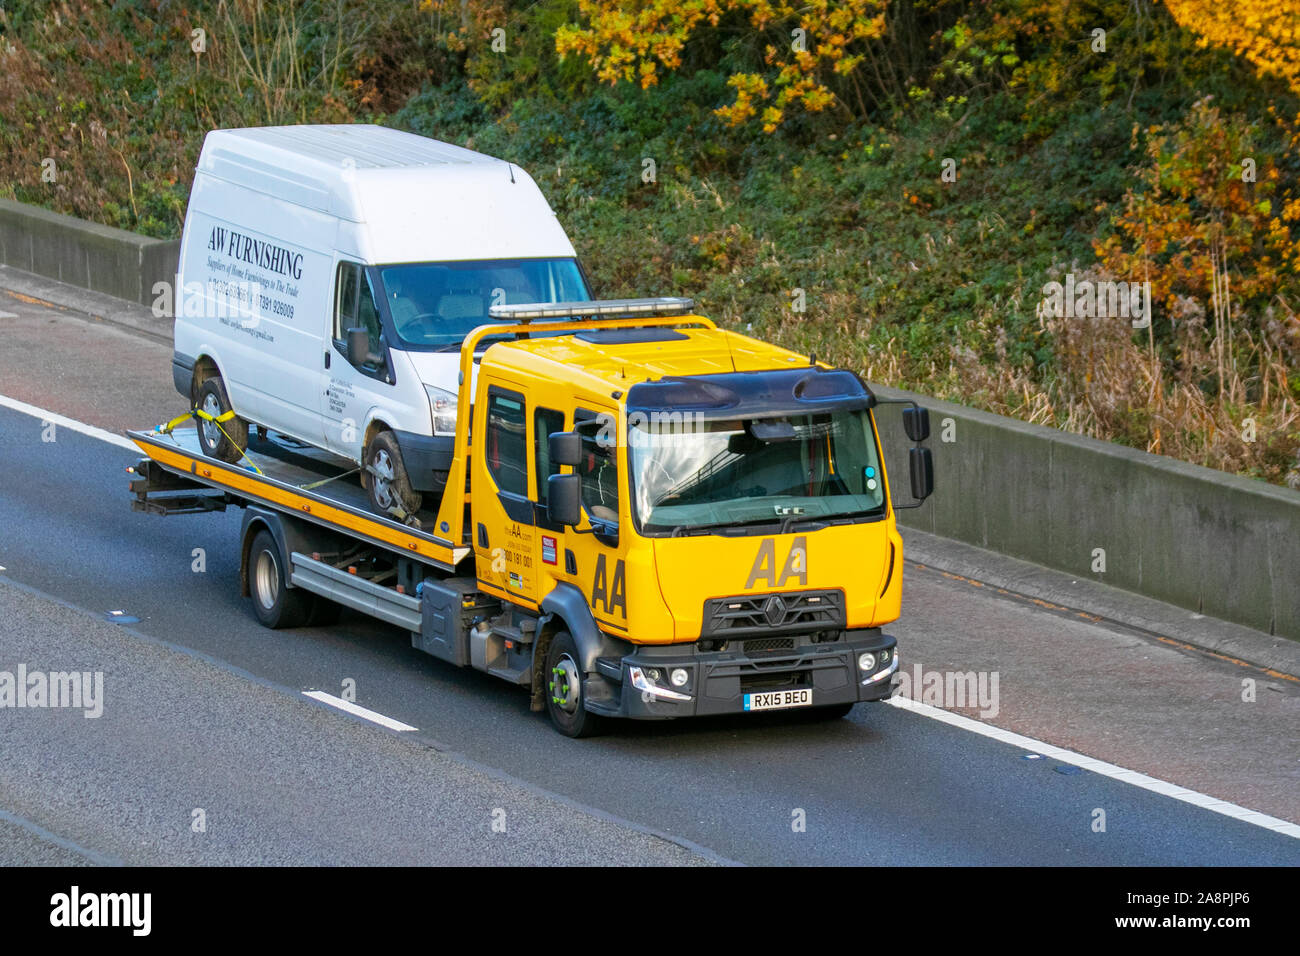 AA Roadside breakdown recovery;  Haulage delivery trucks, lorry, transportation, truck, cargo, vehicle, delivery, commercial transport, industry, on the M6 at Lancaster, UK Stock Photo